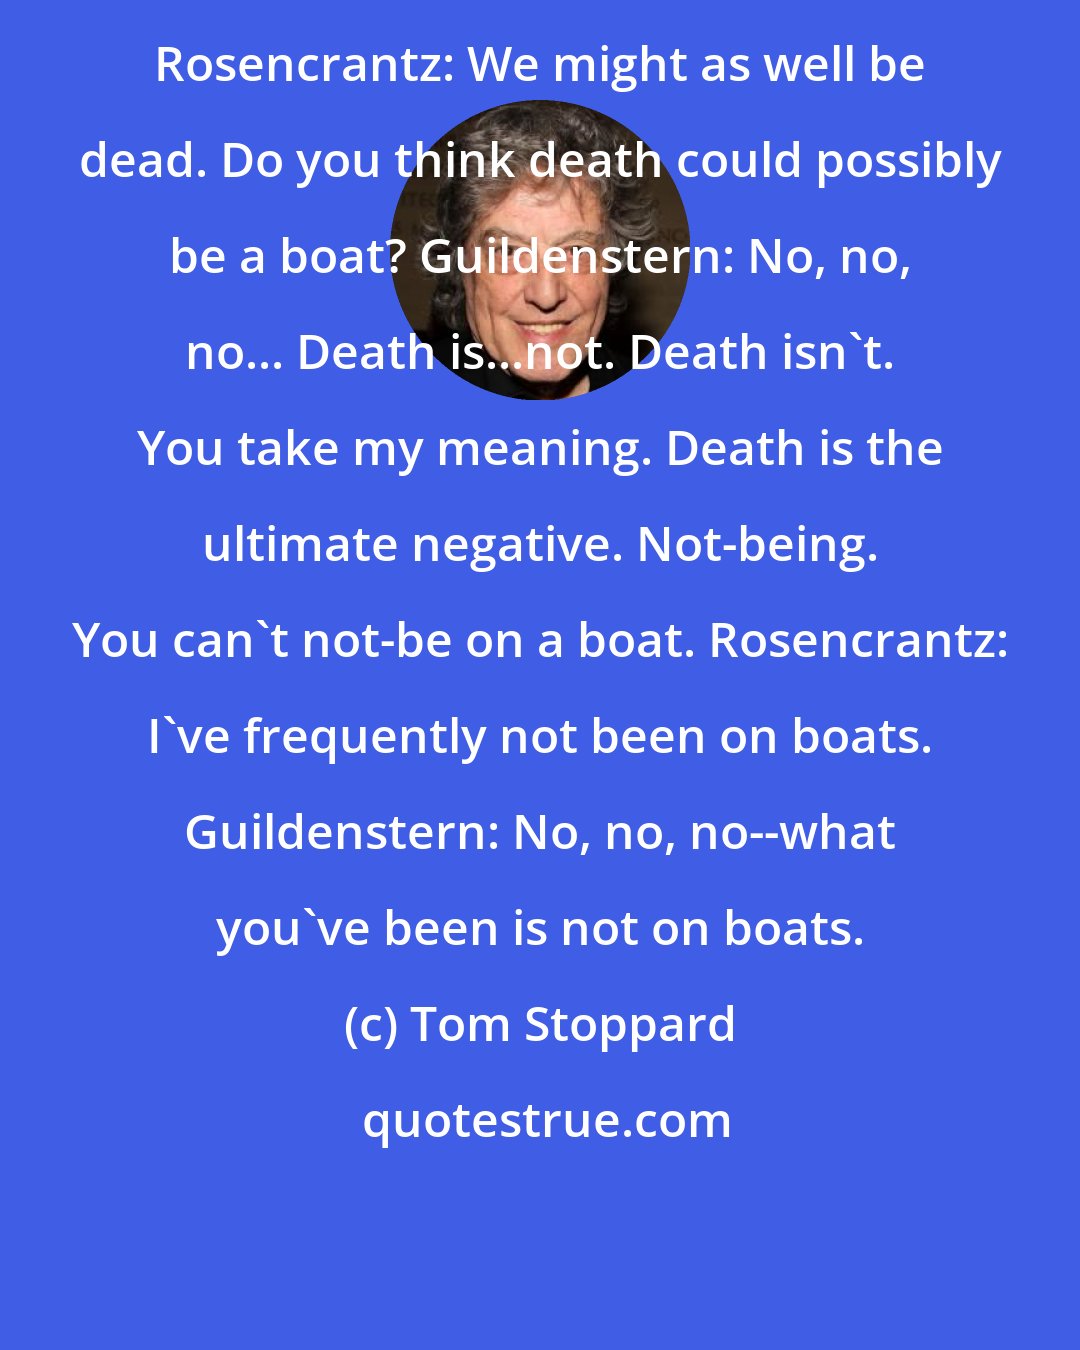 Tom Stoppard: Rosencrantz: We might as well be dead. Do you think death could possibly be a boat? Guildenstern: No, no, no... Death is...not. Death isn't. You take my meaning. Death is the ultimate negative. Not-being. You can't not-be on a boat. Rosencrantz: I've frequently not been on boats. Guildenstern: No, no, no--what you've been is not on boats.